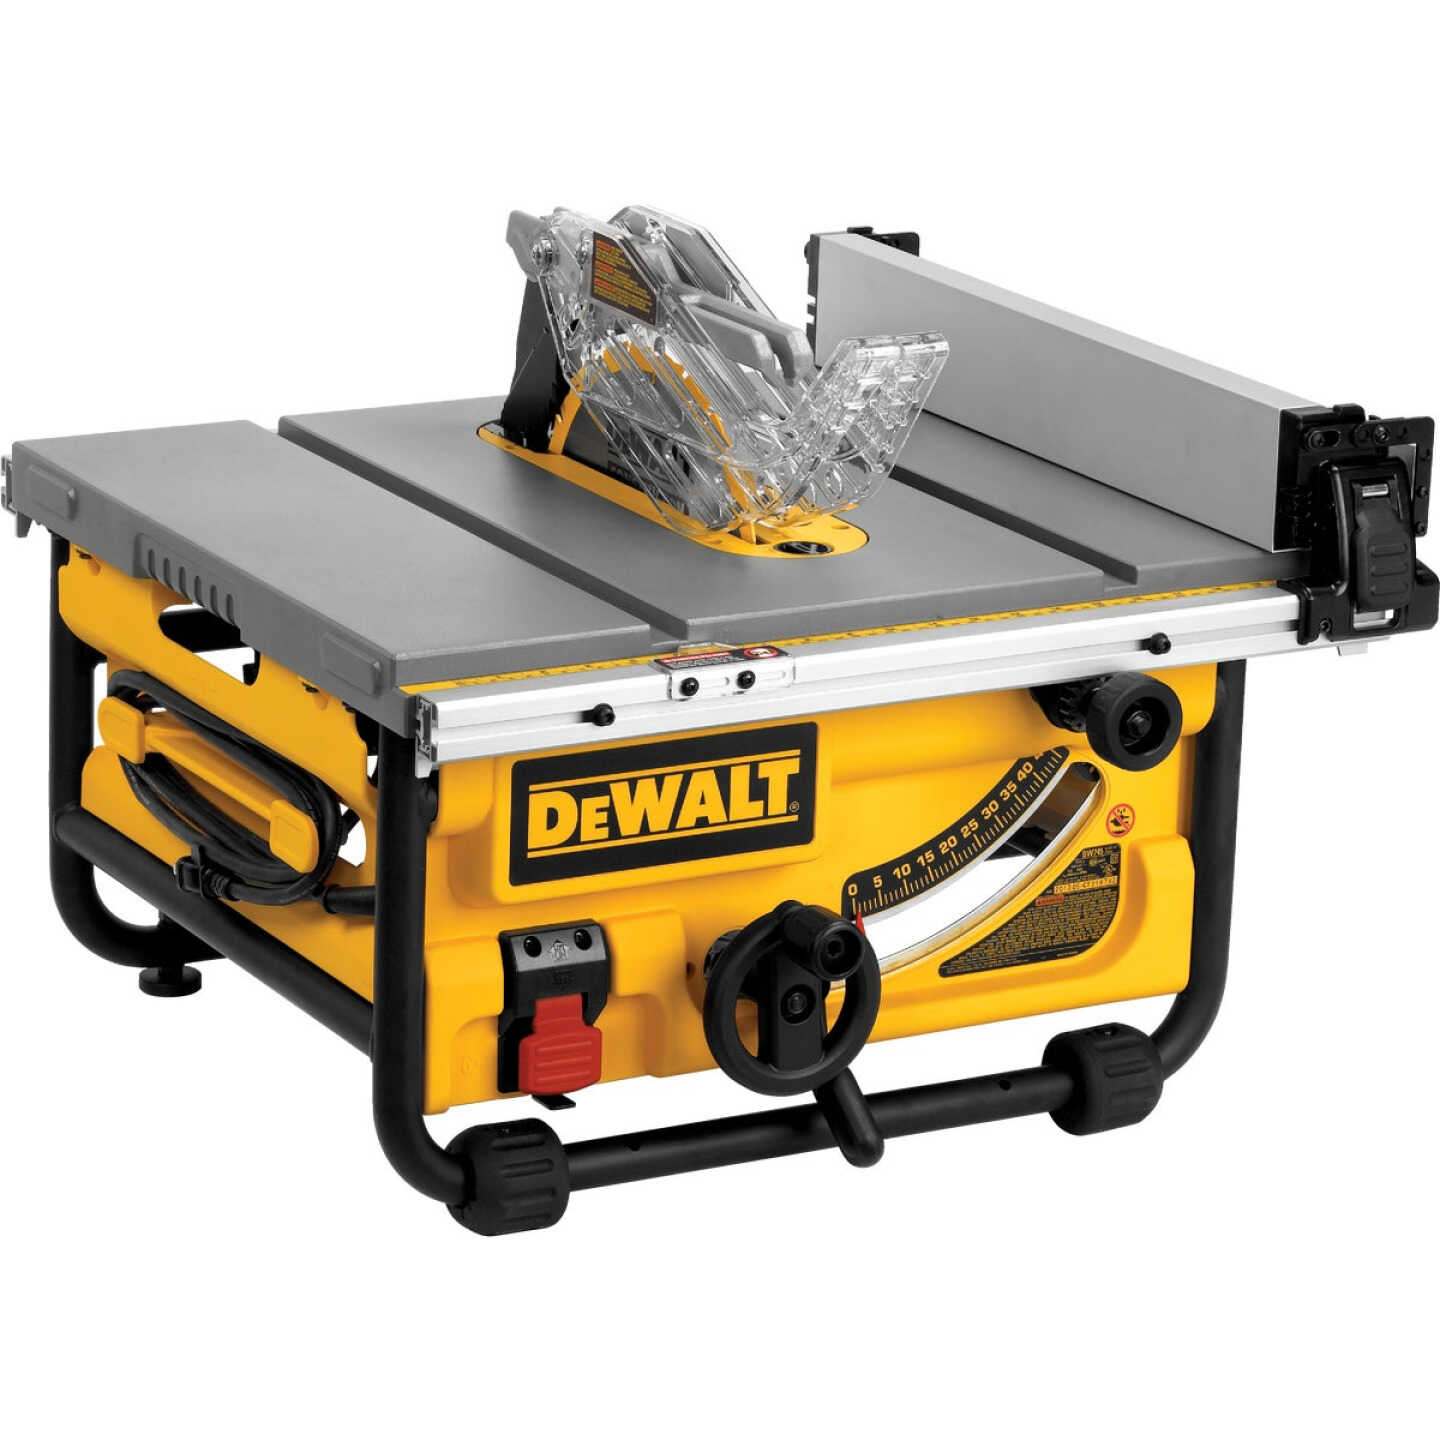 DEWALT 15A 8-1/4 In. Compact Job Site Table Saw w/Site-Pro Modular